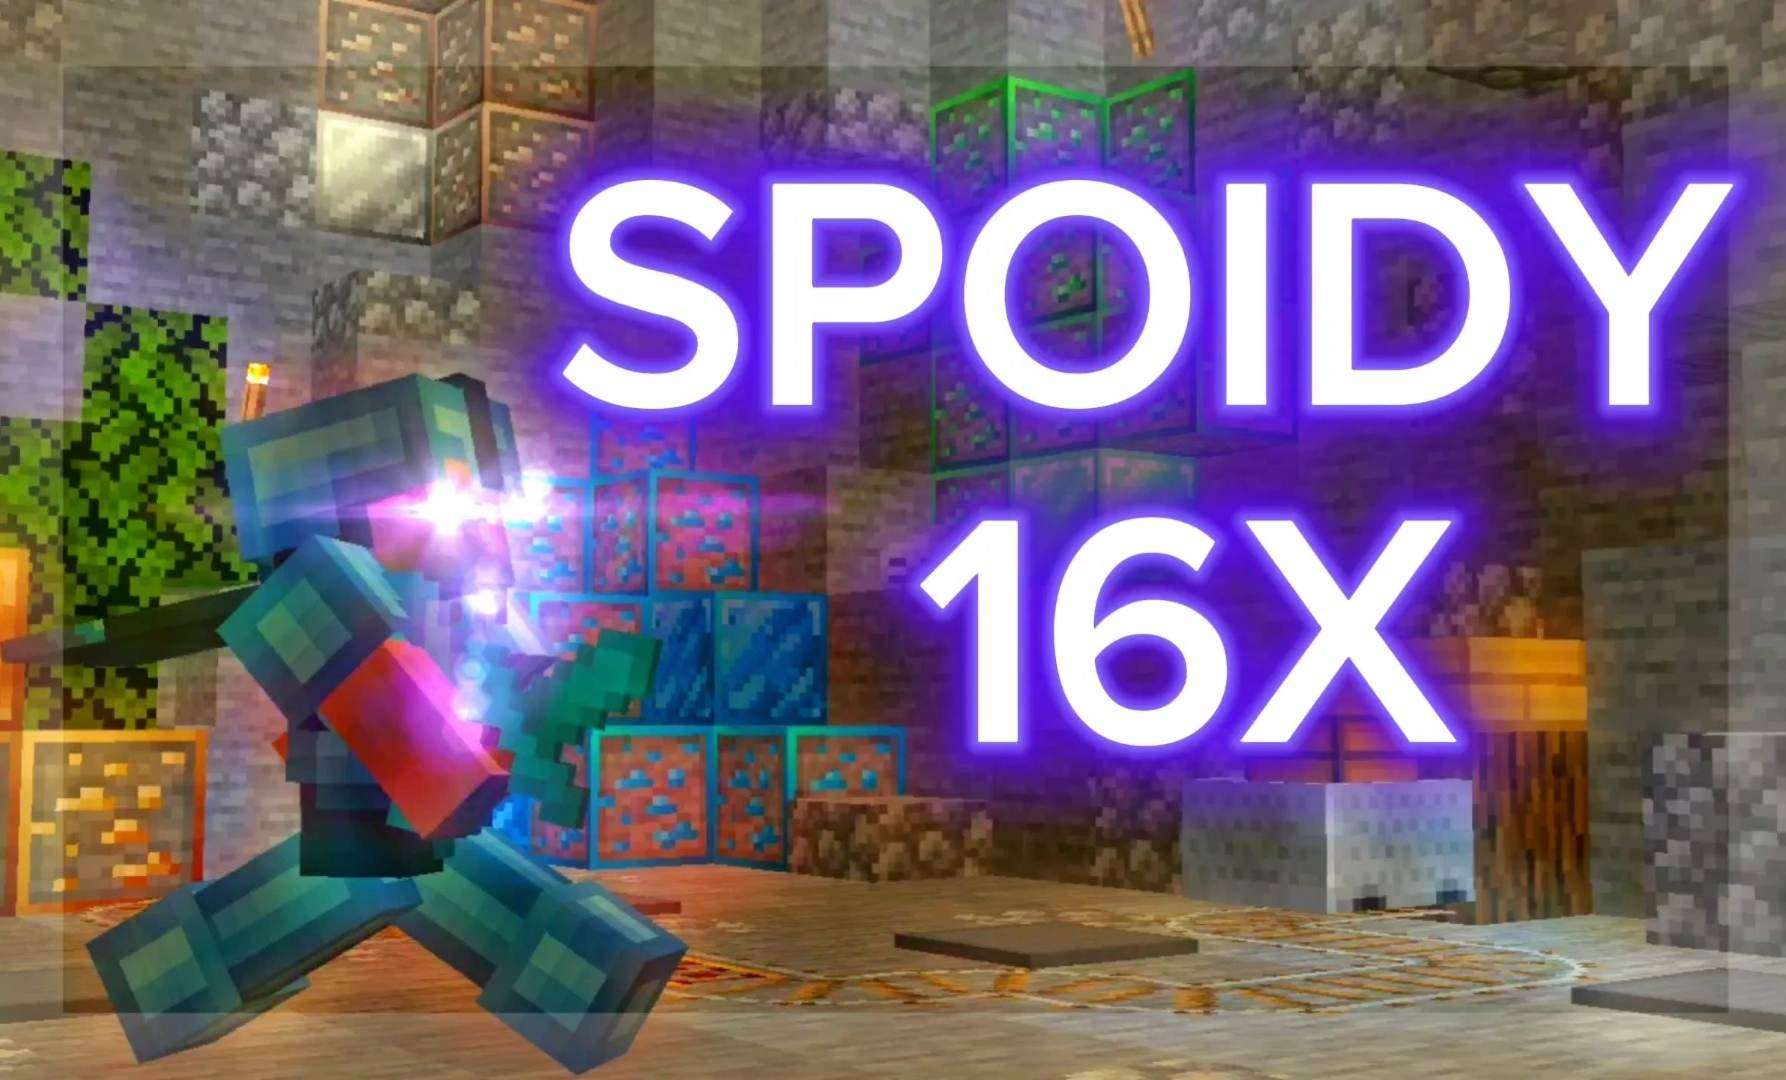 Spoidy 16x 16 by Spoidyy on PvPRP